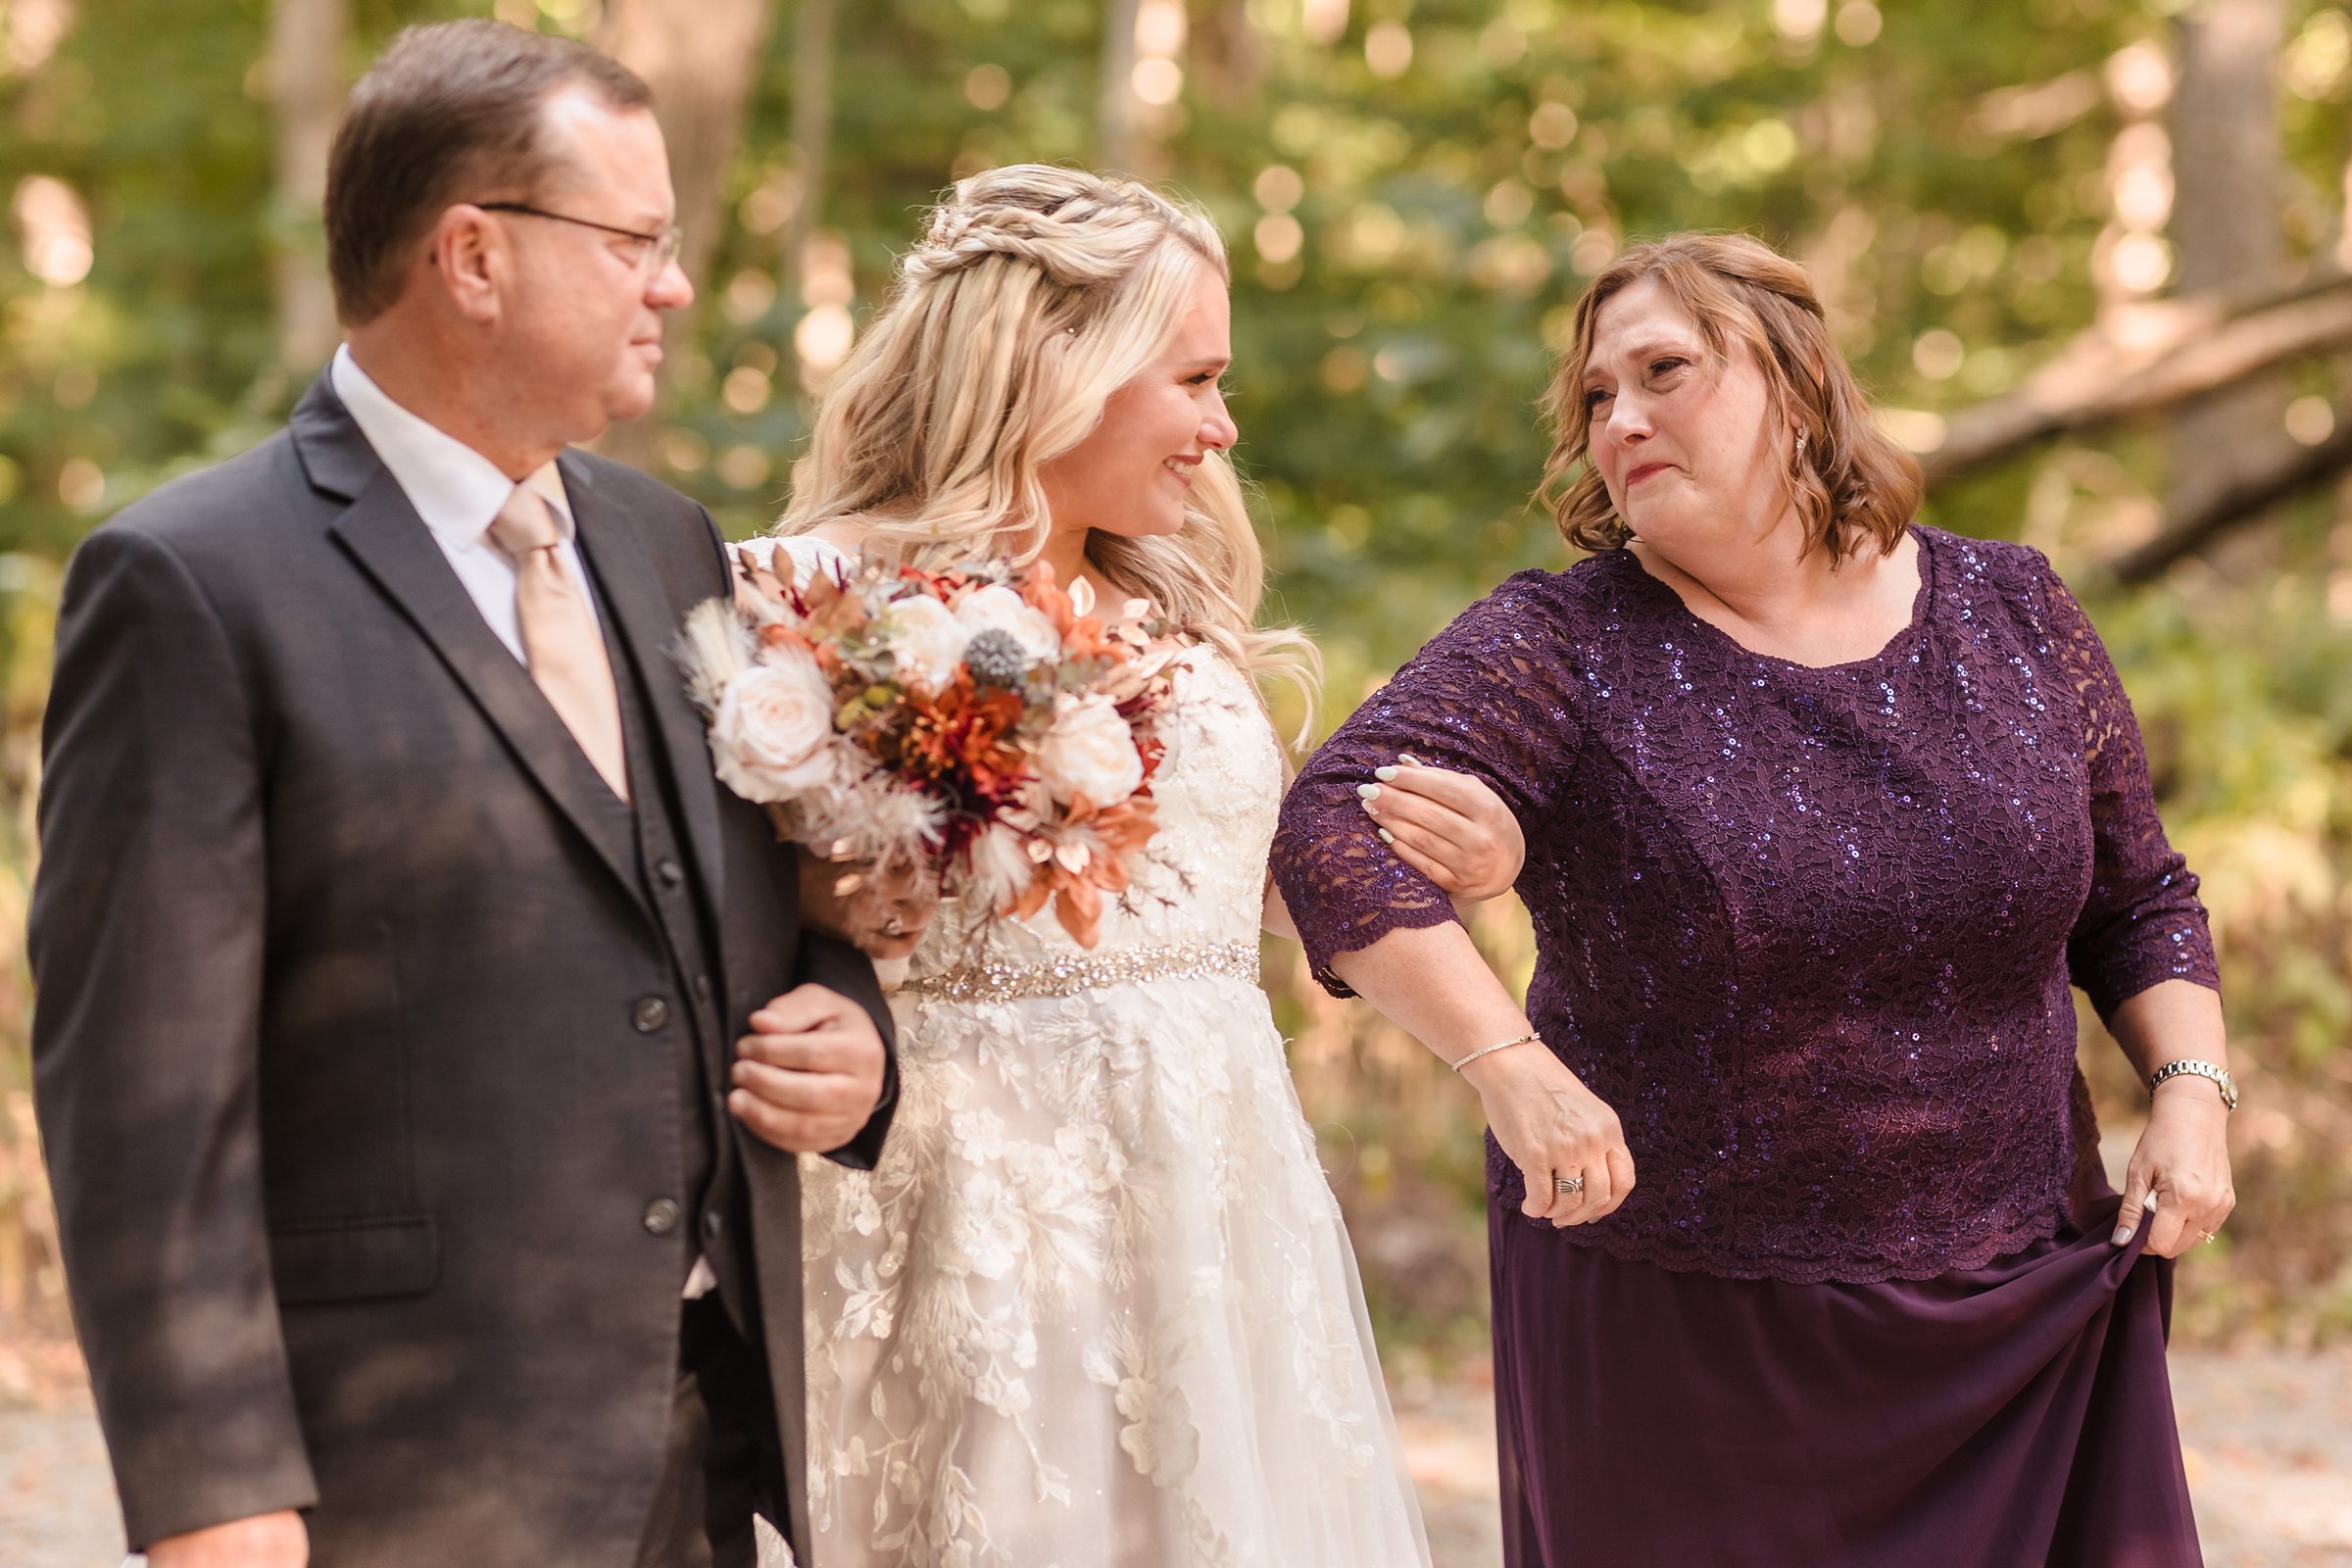 Mom and dad walk the bride down the aisle during a wedding ceremony at Funks Grove in Mclean, Illinois.